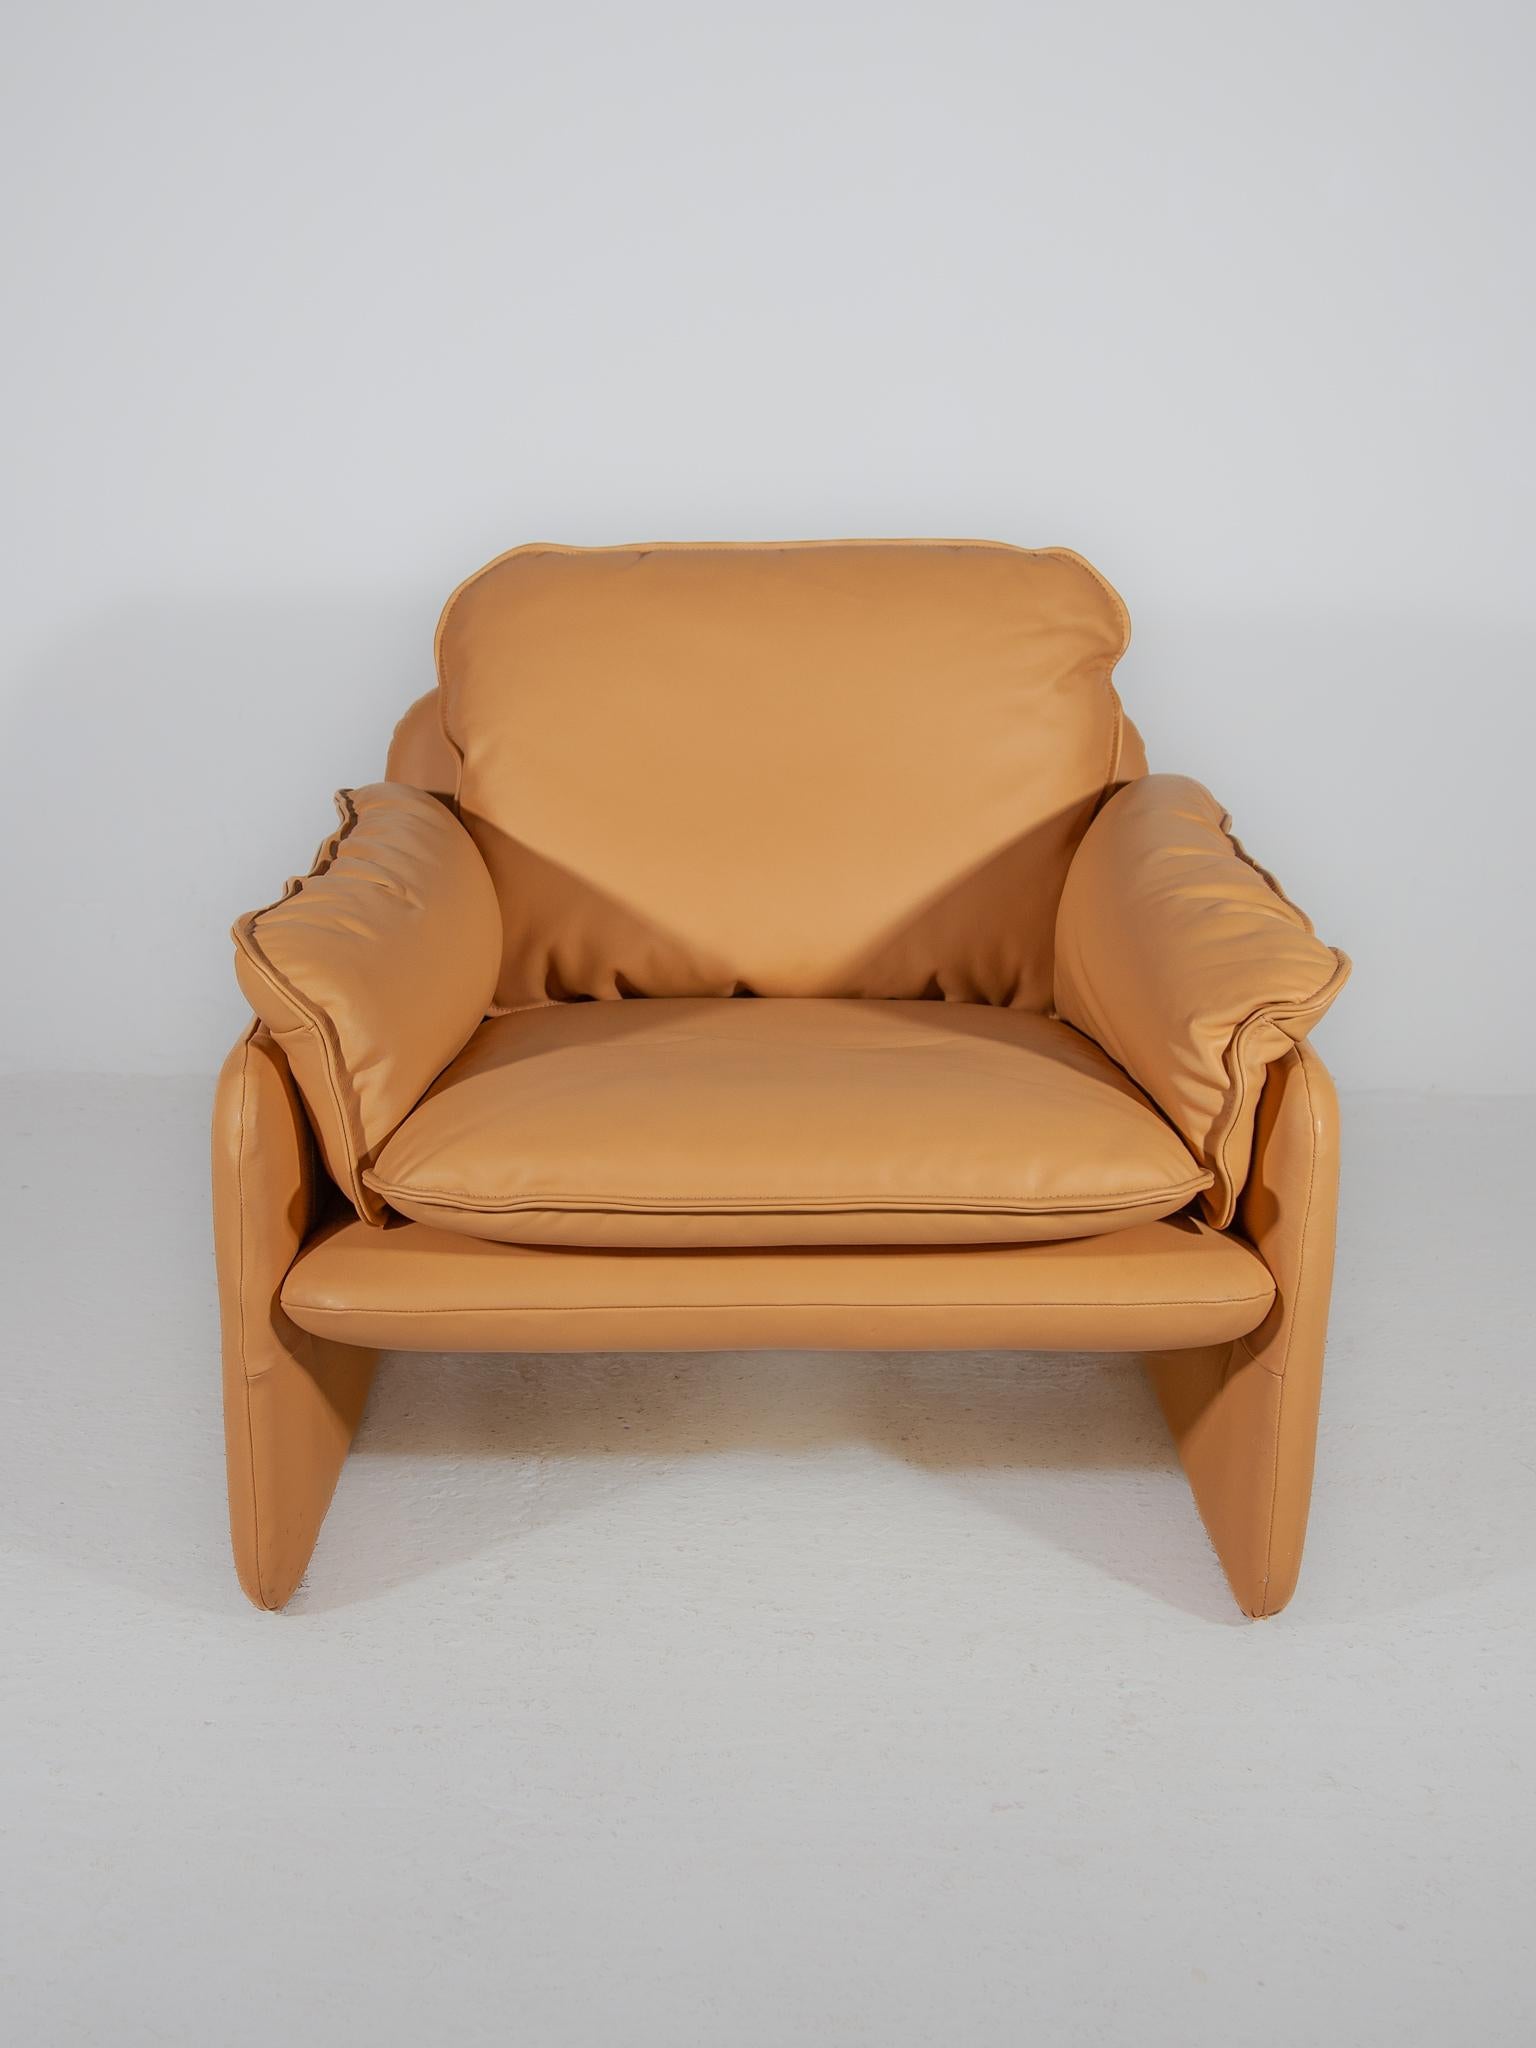 Mid-Century Modern Set of 2 Ds-61 Armchairs Camel Leather designed by De Sede, 1970s For Sale